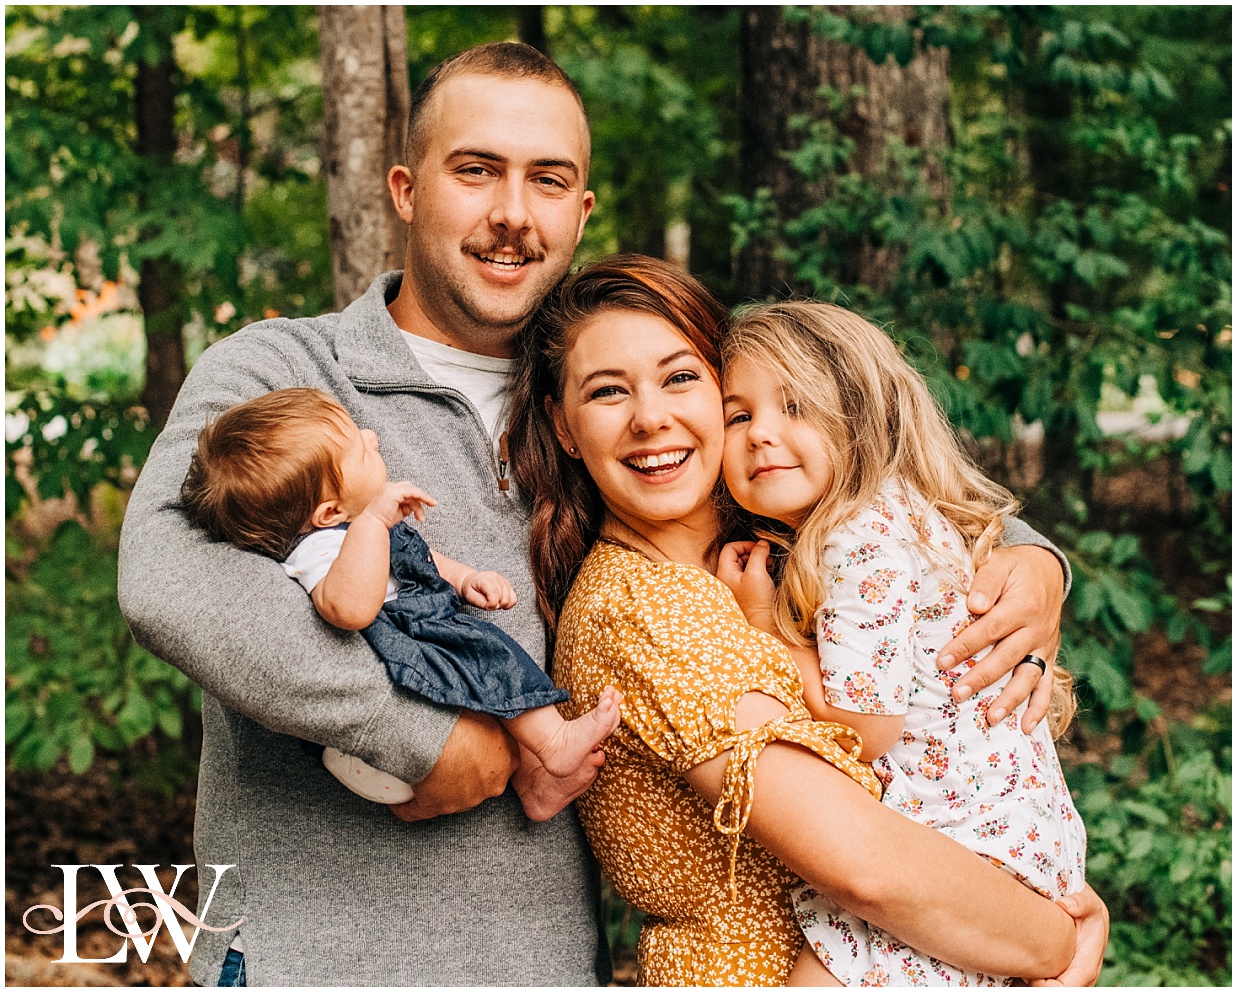 Beautiful Chesapeake family session in the forest, taken by Laura Walter Photography